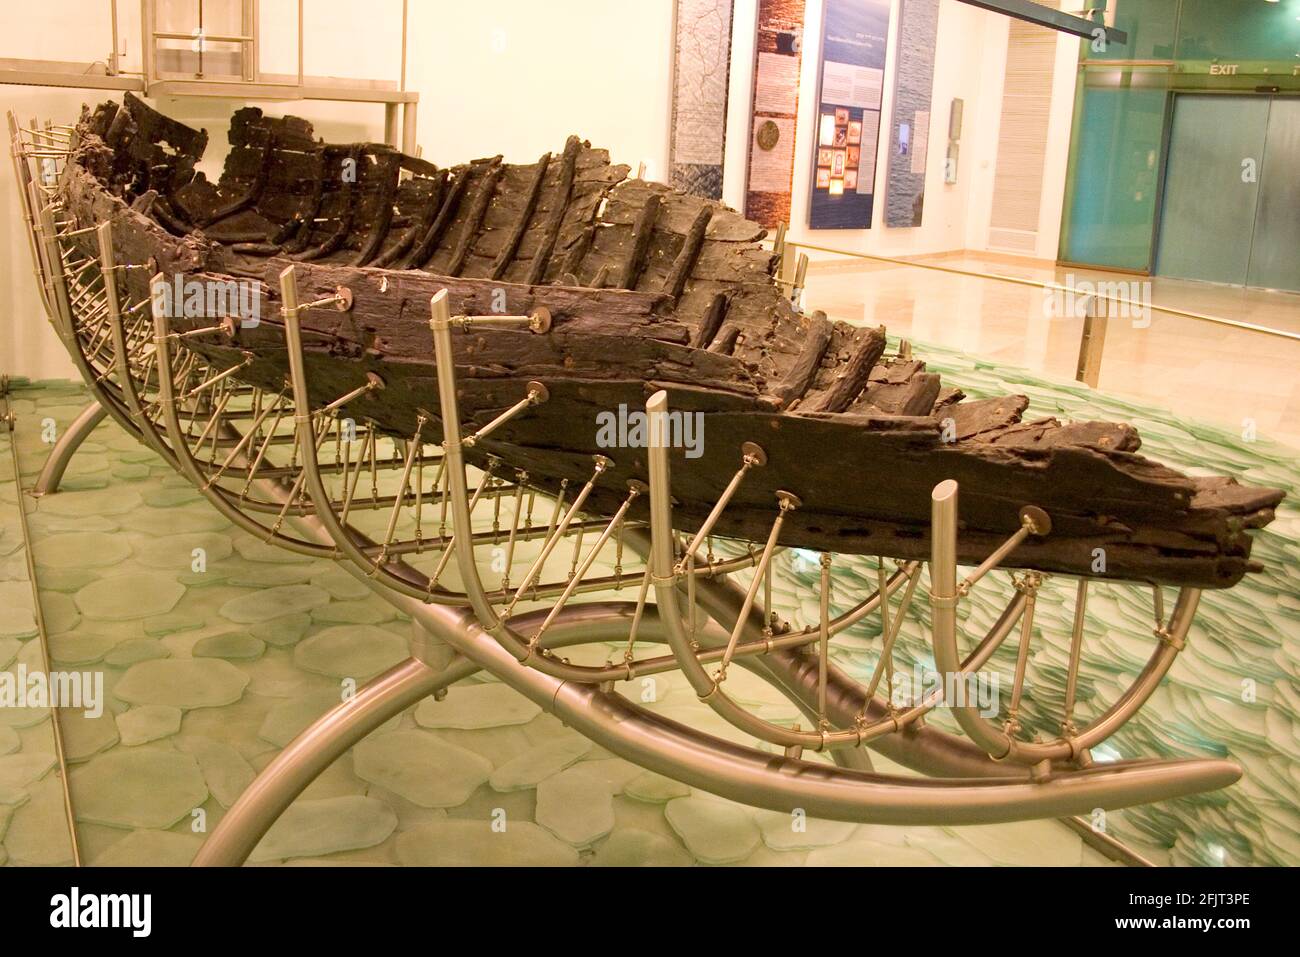 Israel, Sea of Galilee, Jesus’ Boat. Old boat uncovered in the sea of Galilee, from the time of Jesus Christ Now on display at a museum at Kibbutz Gin Stock Photo